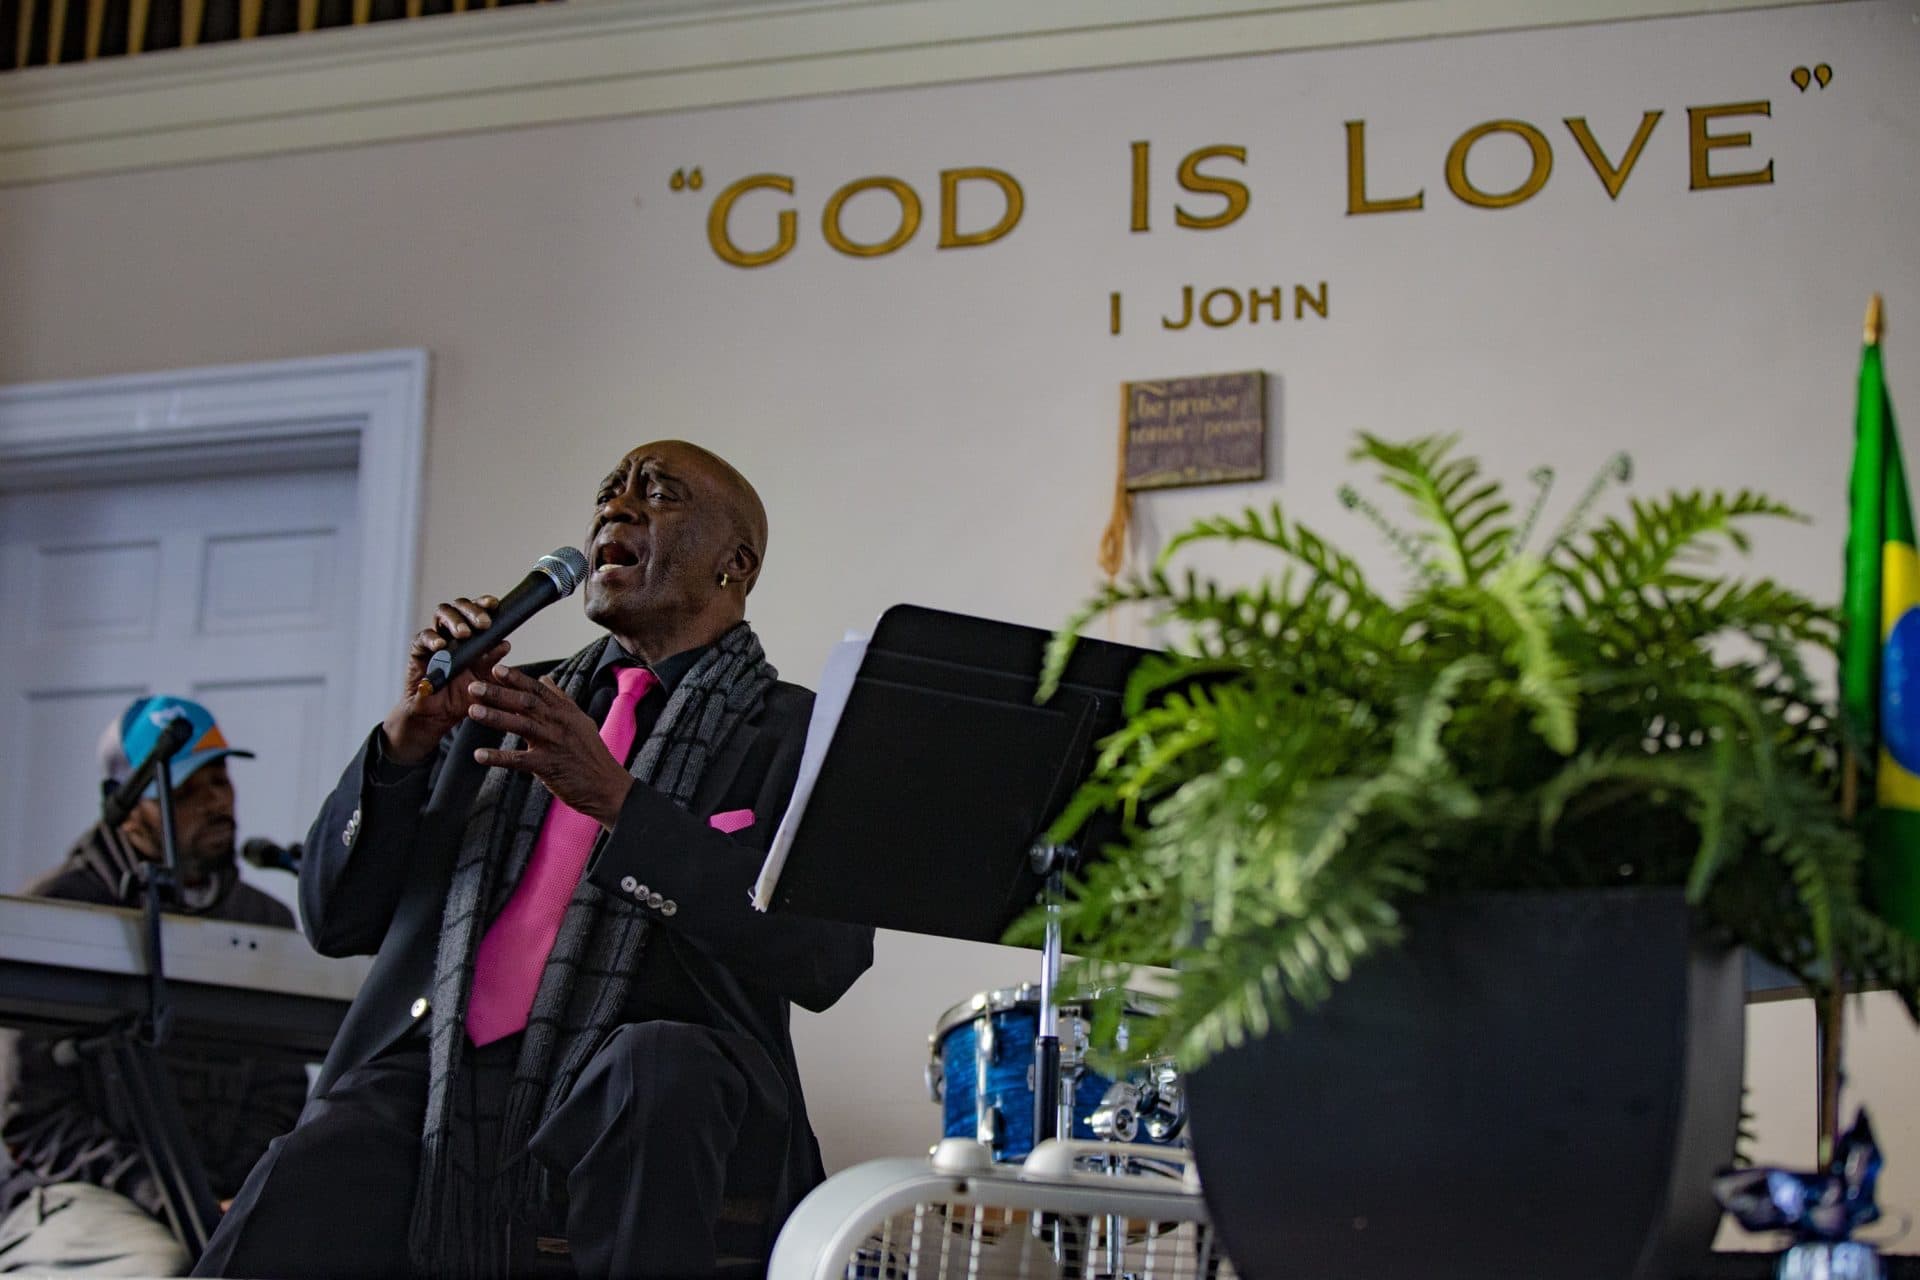 Will Newton, a former lead singer for The Platters, is expanding the church's musical ministry program. He's recruiting people who frequent Perkins Park for a choir. (Jesse Costa/WBUR)